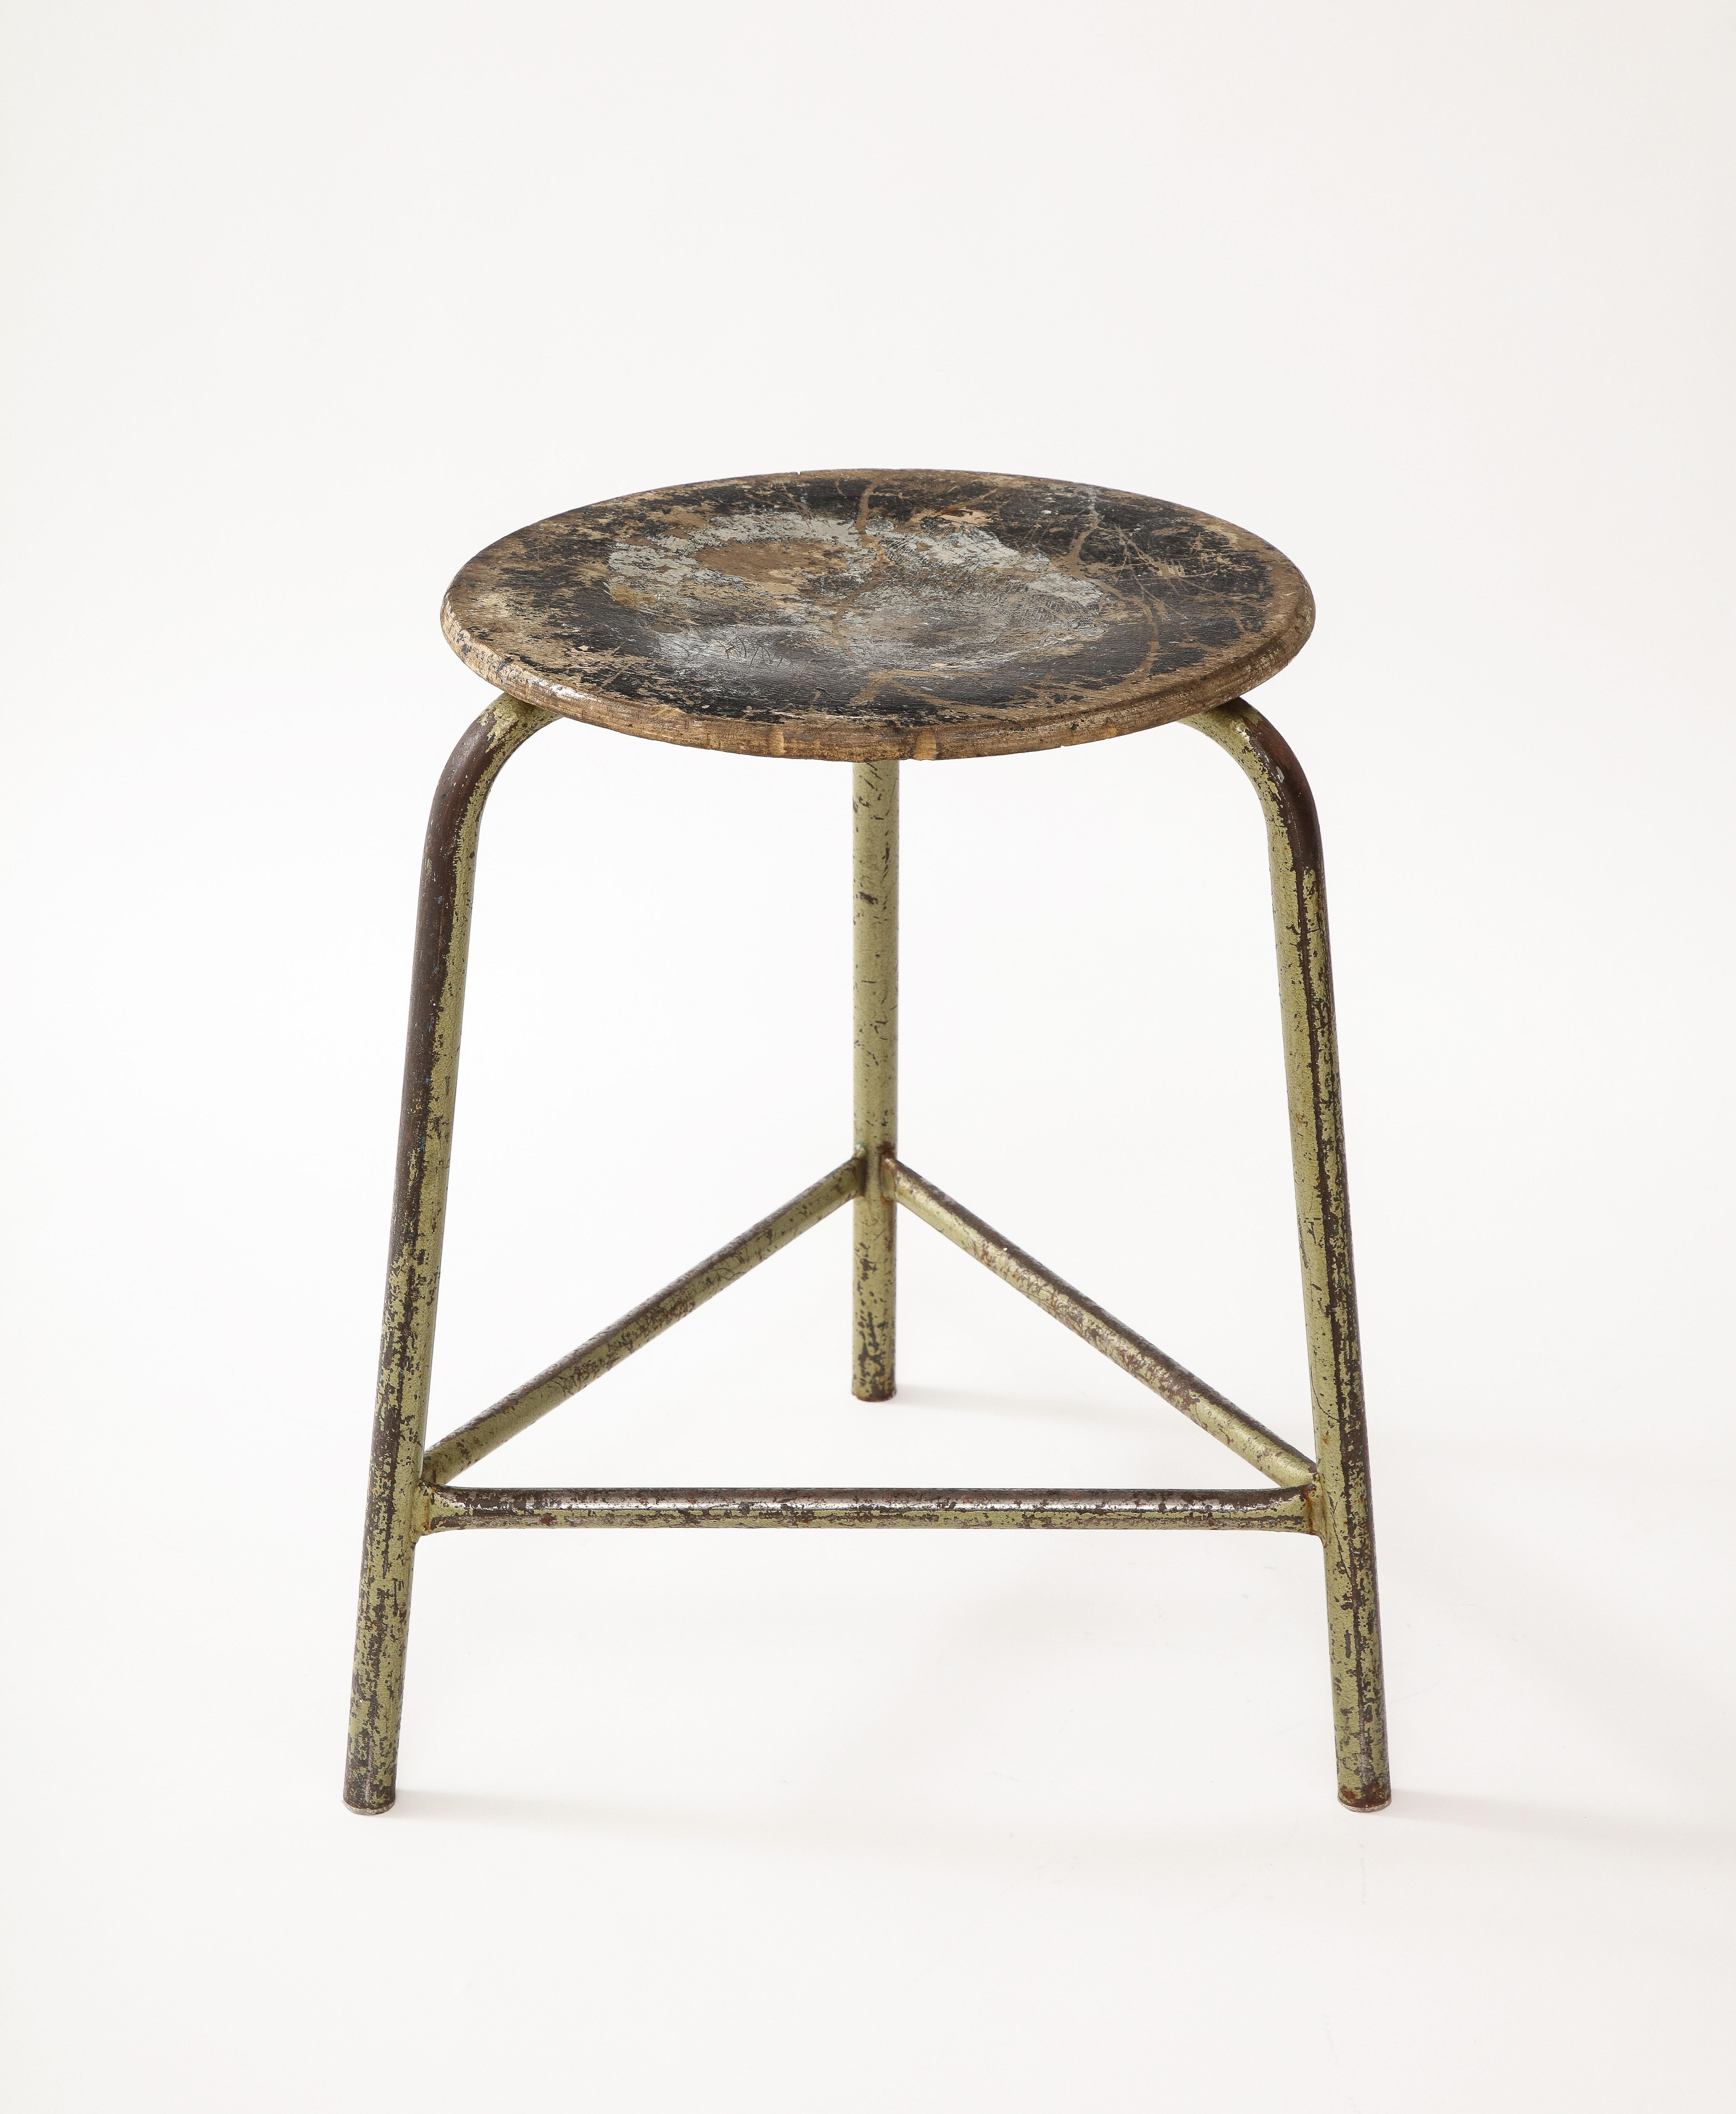 Steel Industrial Stools, France, c. 1960 For Sale